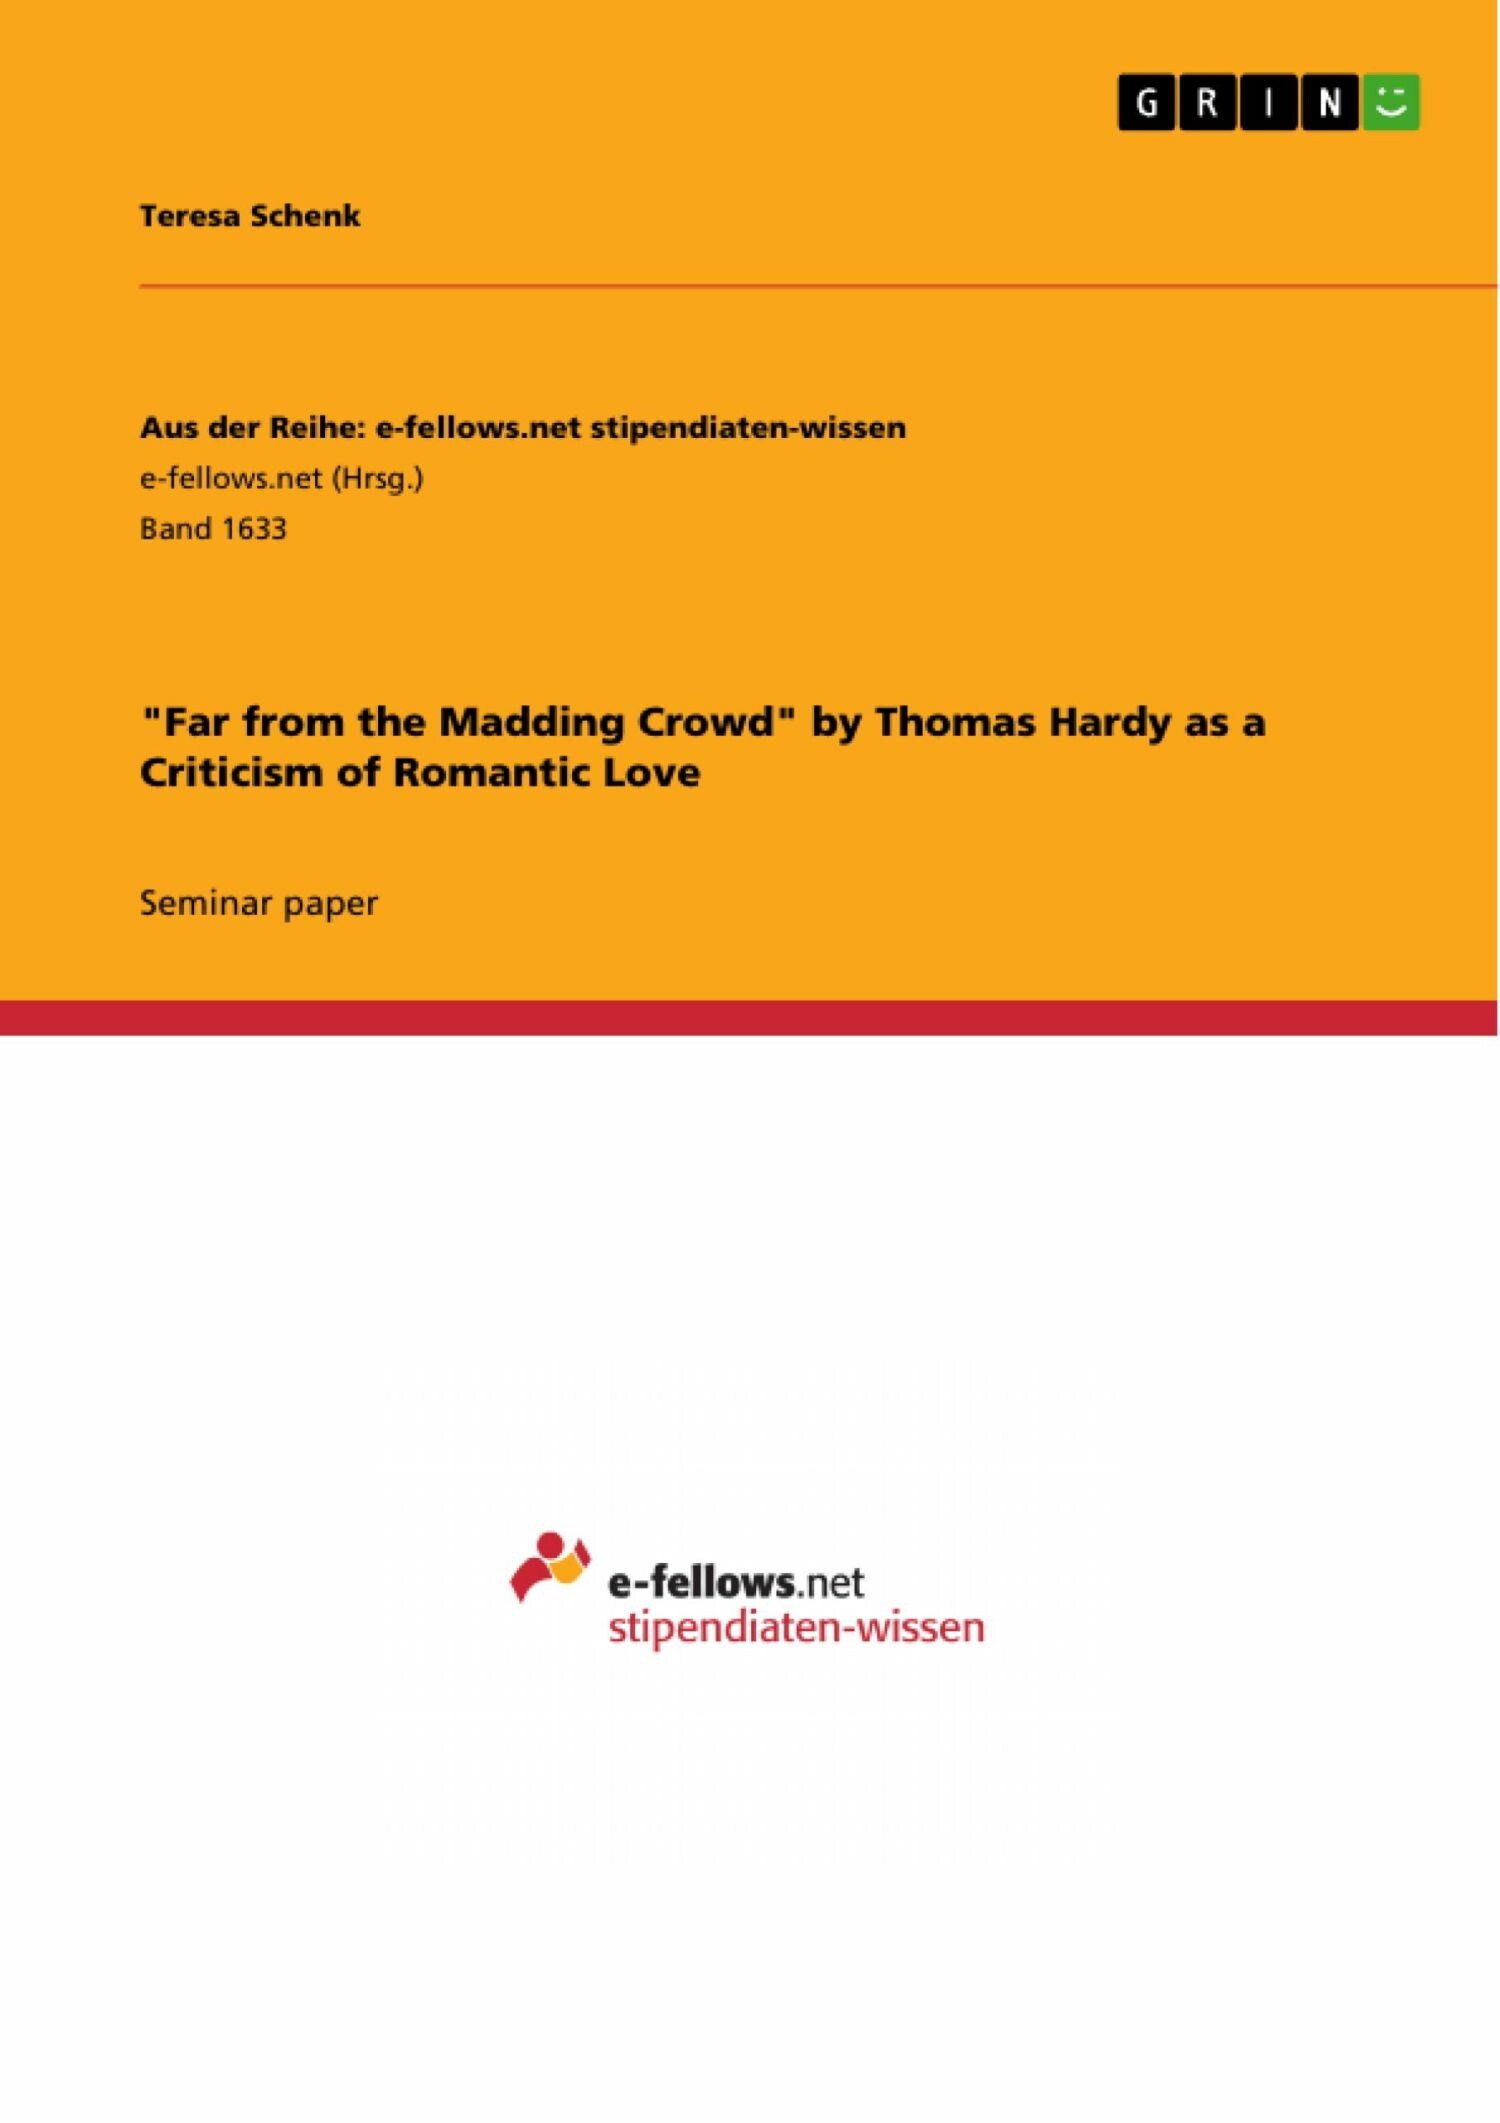 'Far from the Madding Crowd' by Thomas Hardy as a Criticism of Romantic Love